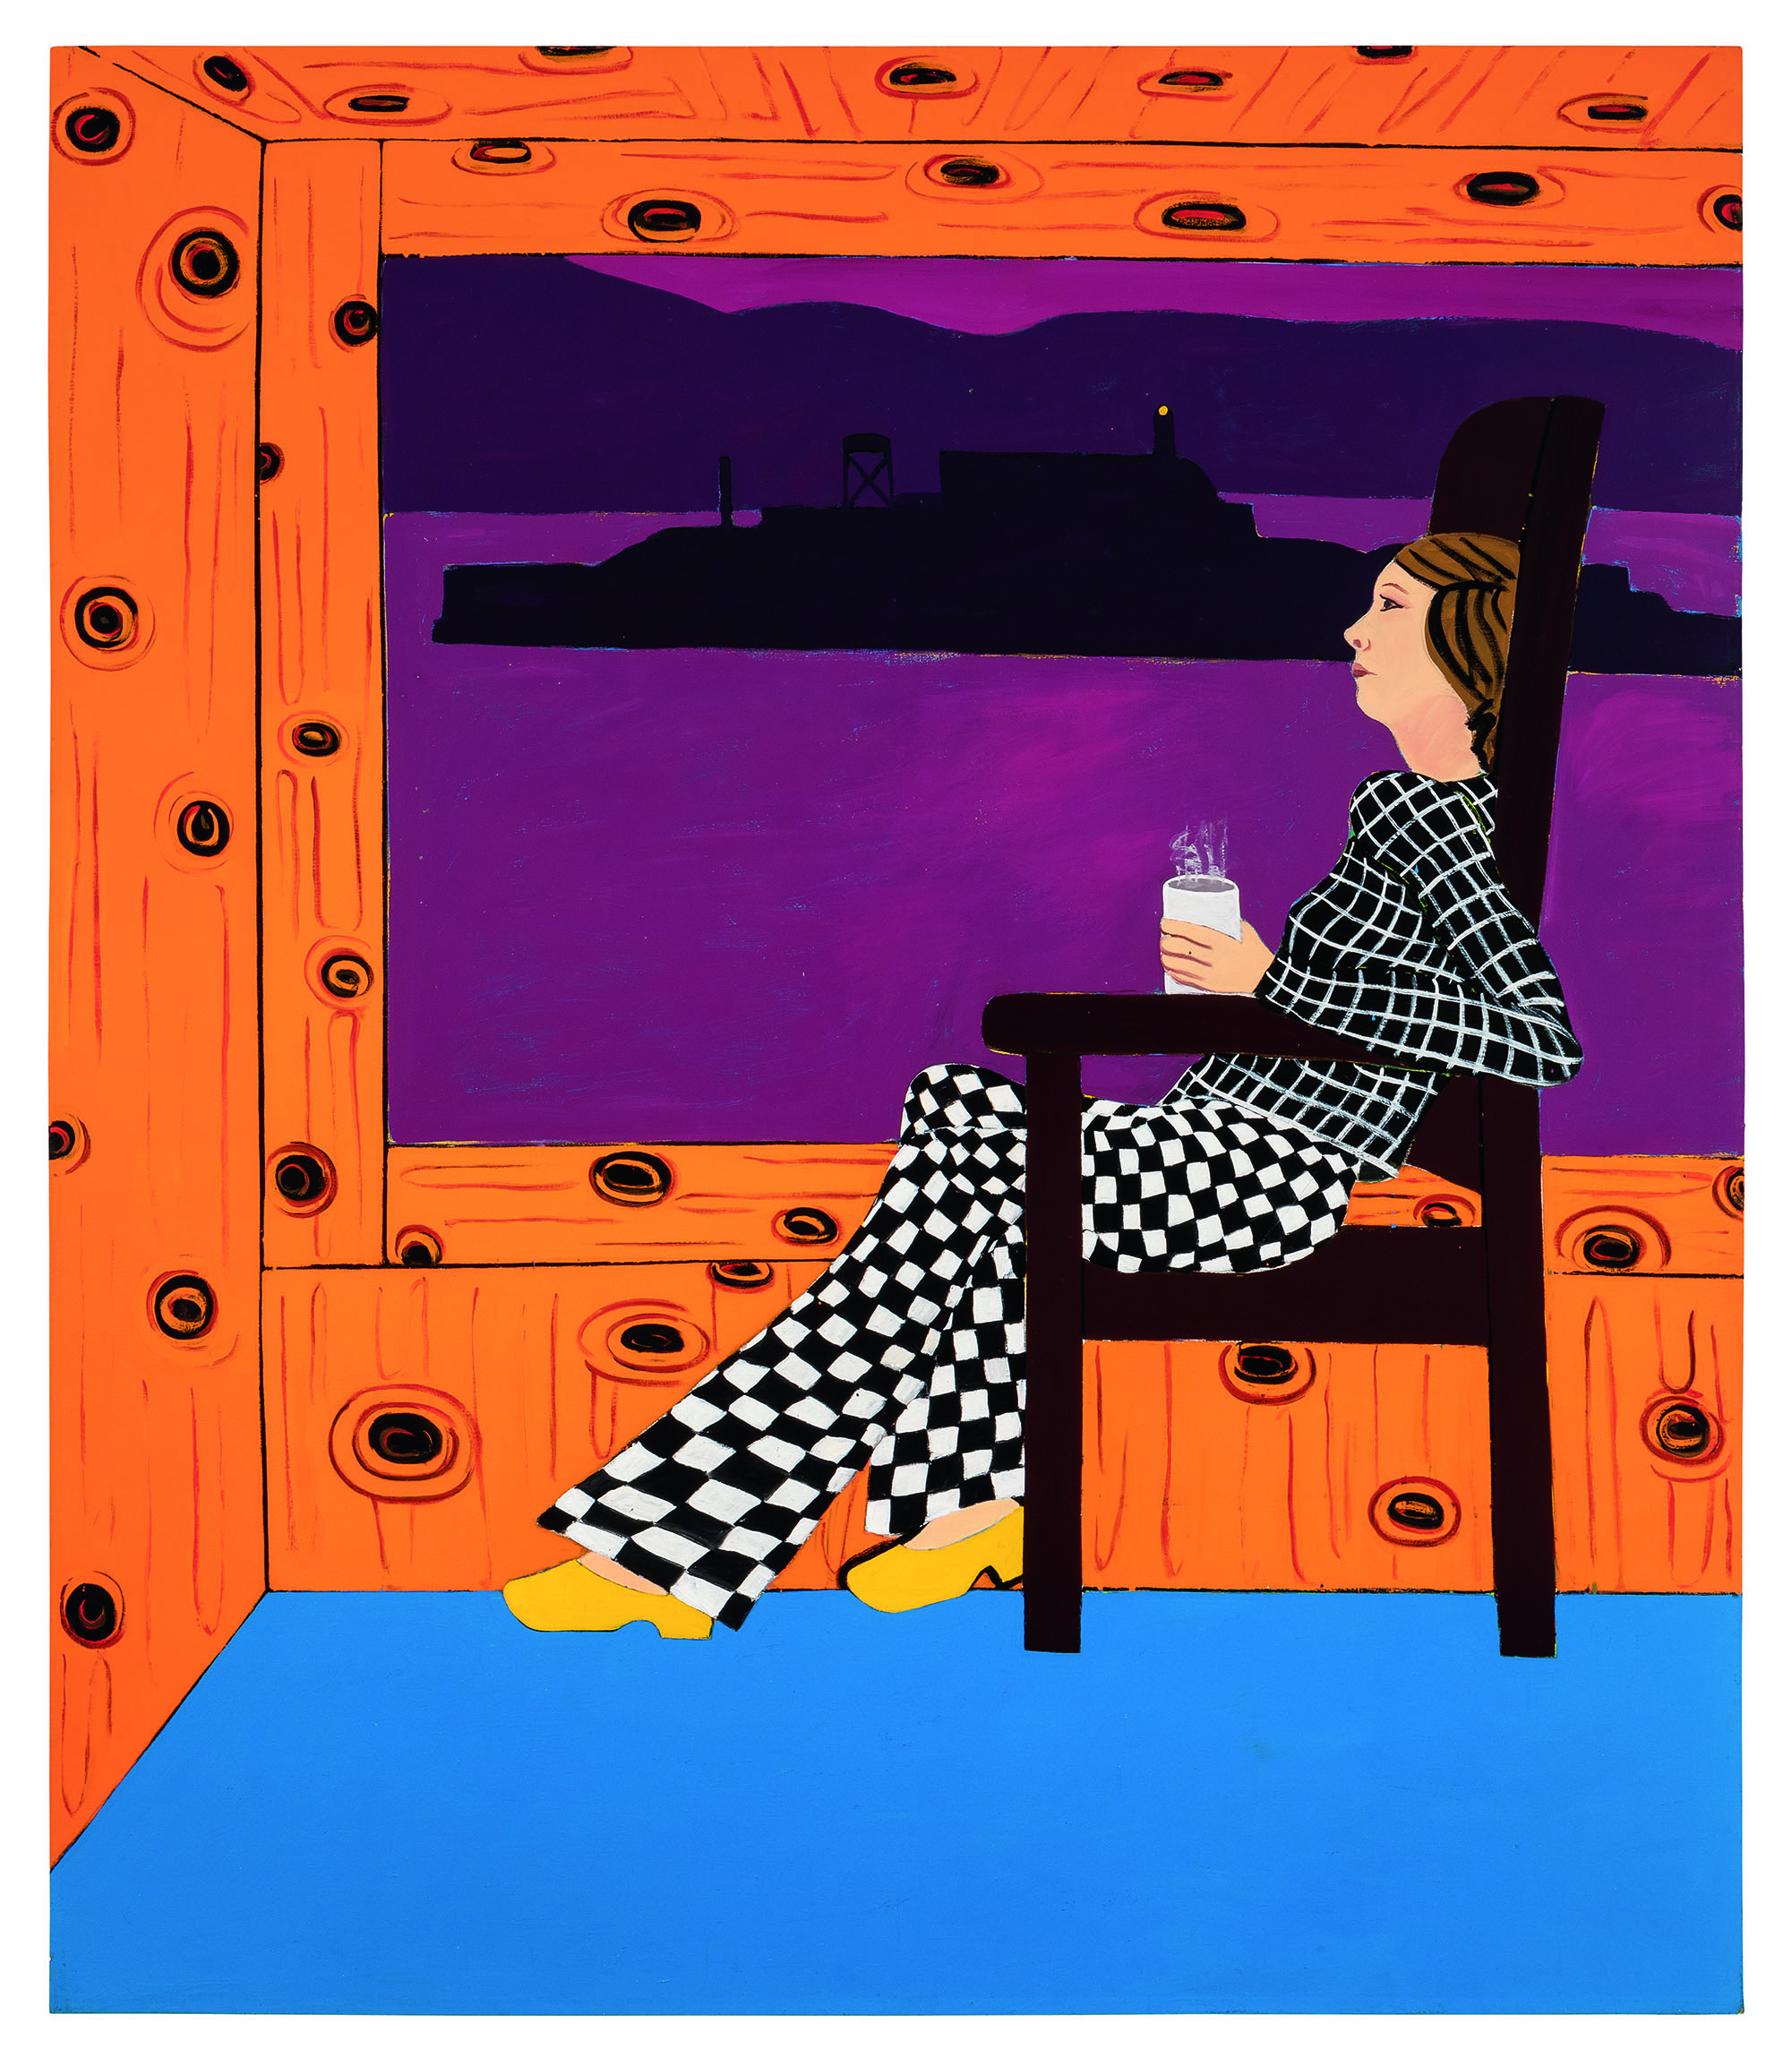 A woman sits in a room with an orange wall and a blue floor before a large window overlooking a body of water. The room is illuminated, while outside, the violet and black colors suggest nighttime. The woman holds a cup of coffee, wears black-and-white checkered pants and shirt and yellow clogs, and stares wistfully into the distance. 